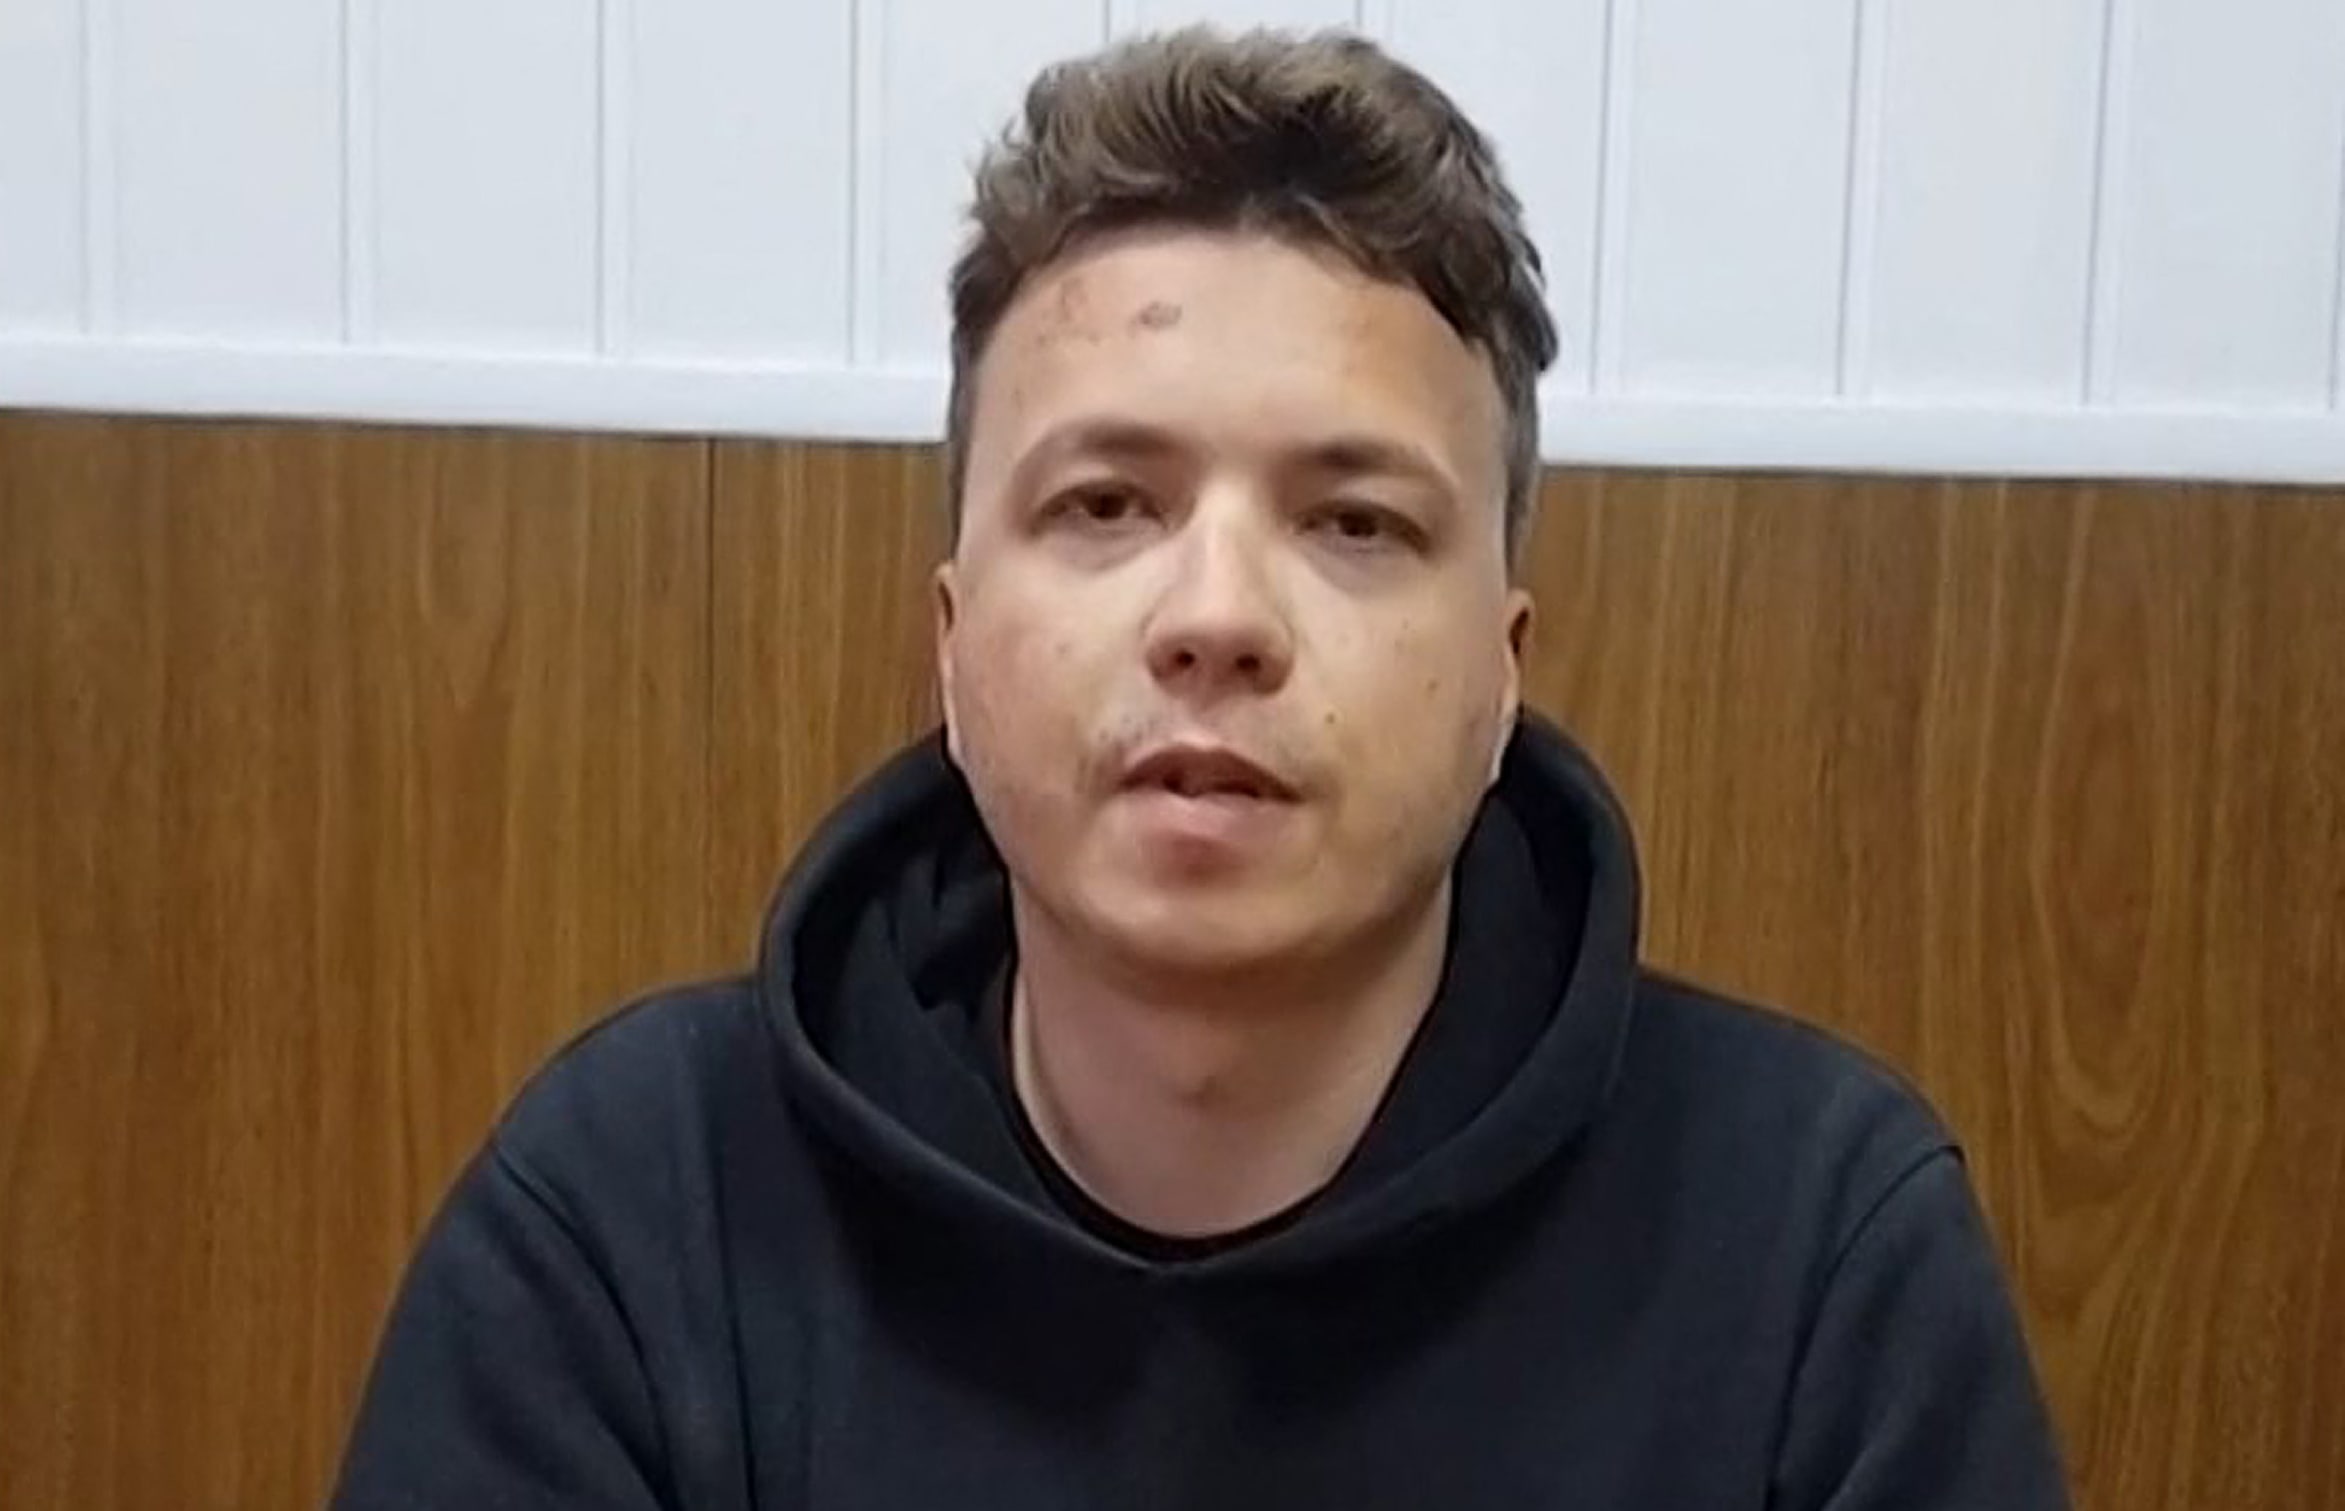 A video of Roman Protasevich in detention was released on Monday. The undated video was made available by anonymously-sourced Telegram channel Nevolf and shared on social media and Belarus State TV.